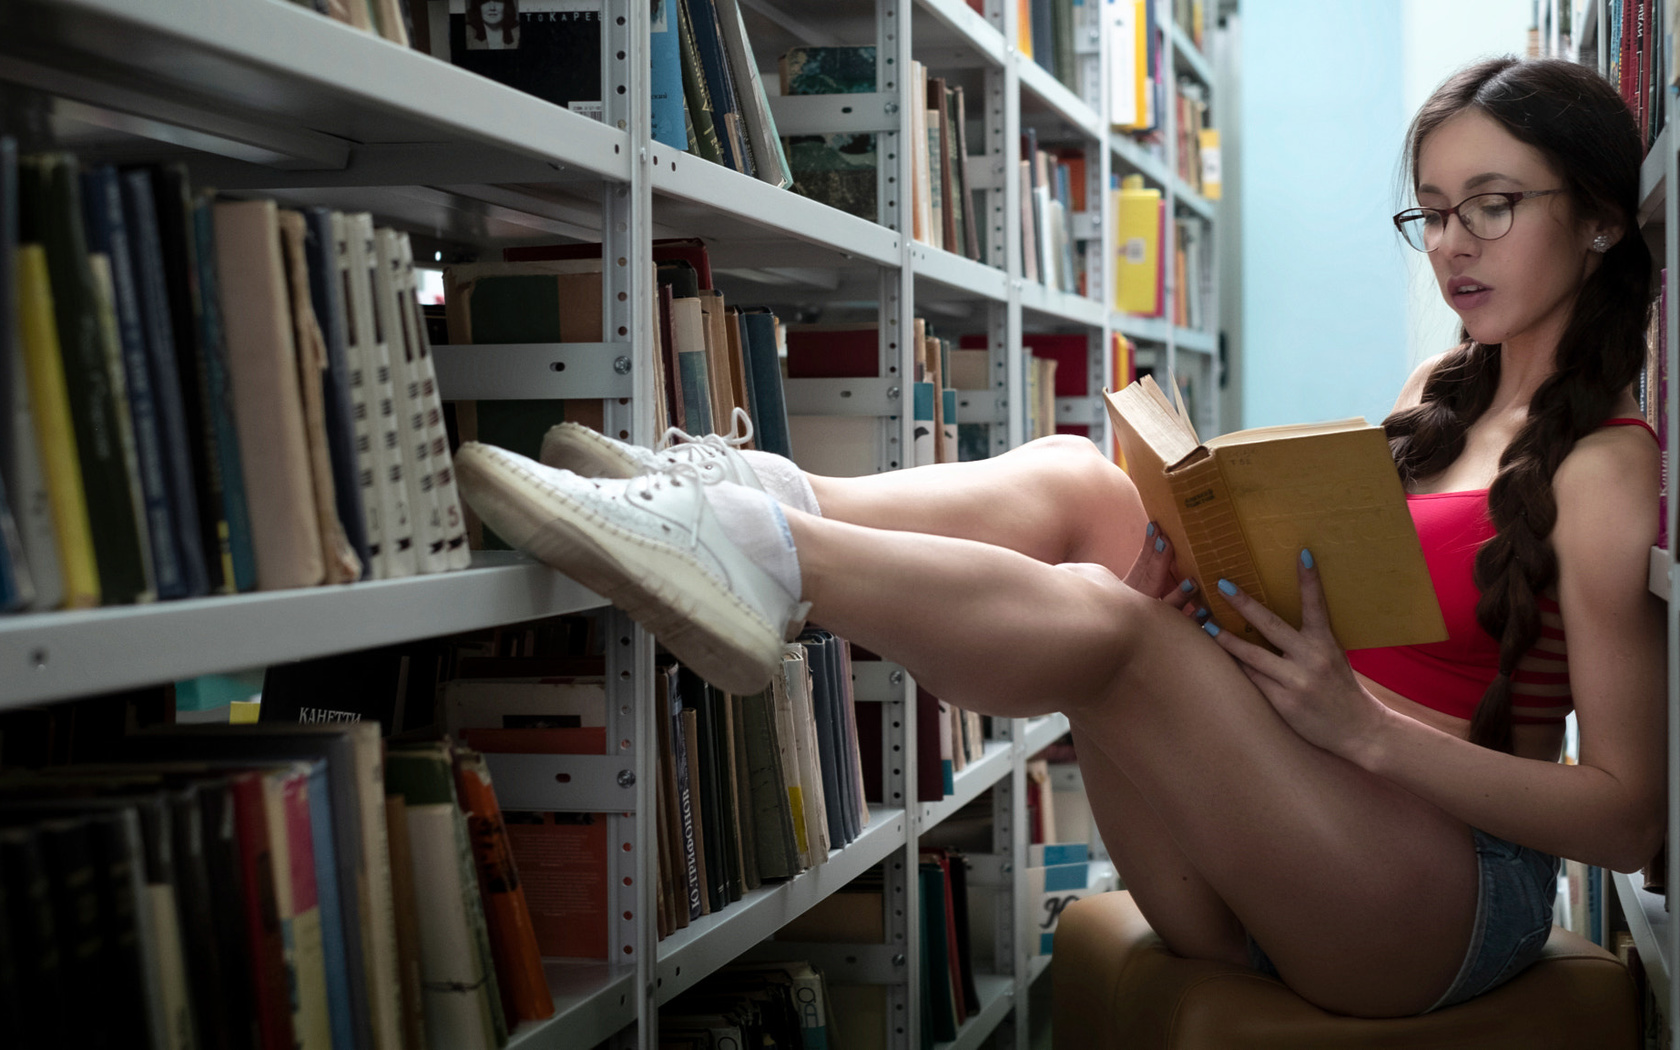 women, sitting, jean shorts, sneakers, books, pigtails, women with glasses, white socks, painted nails